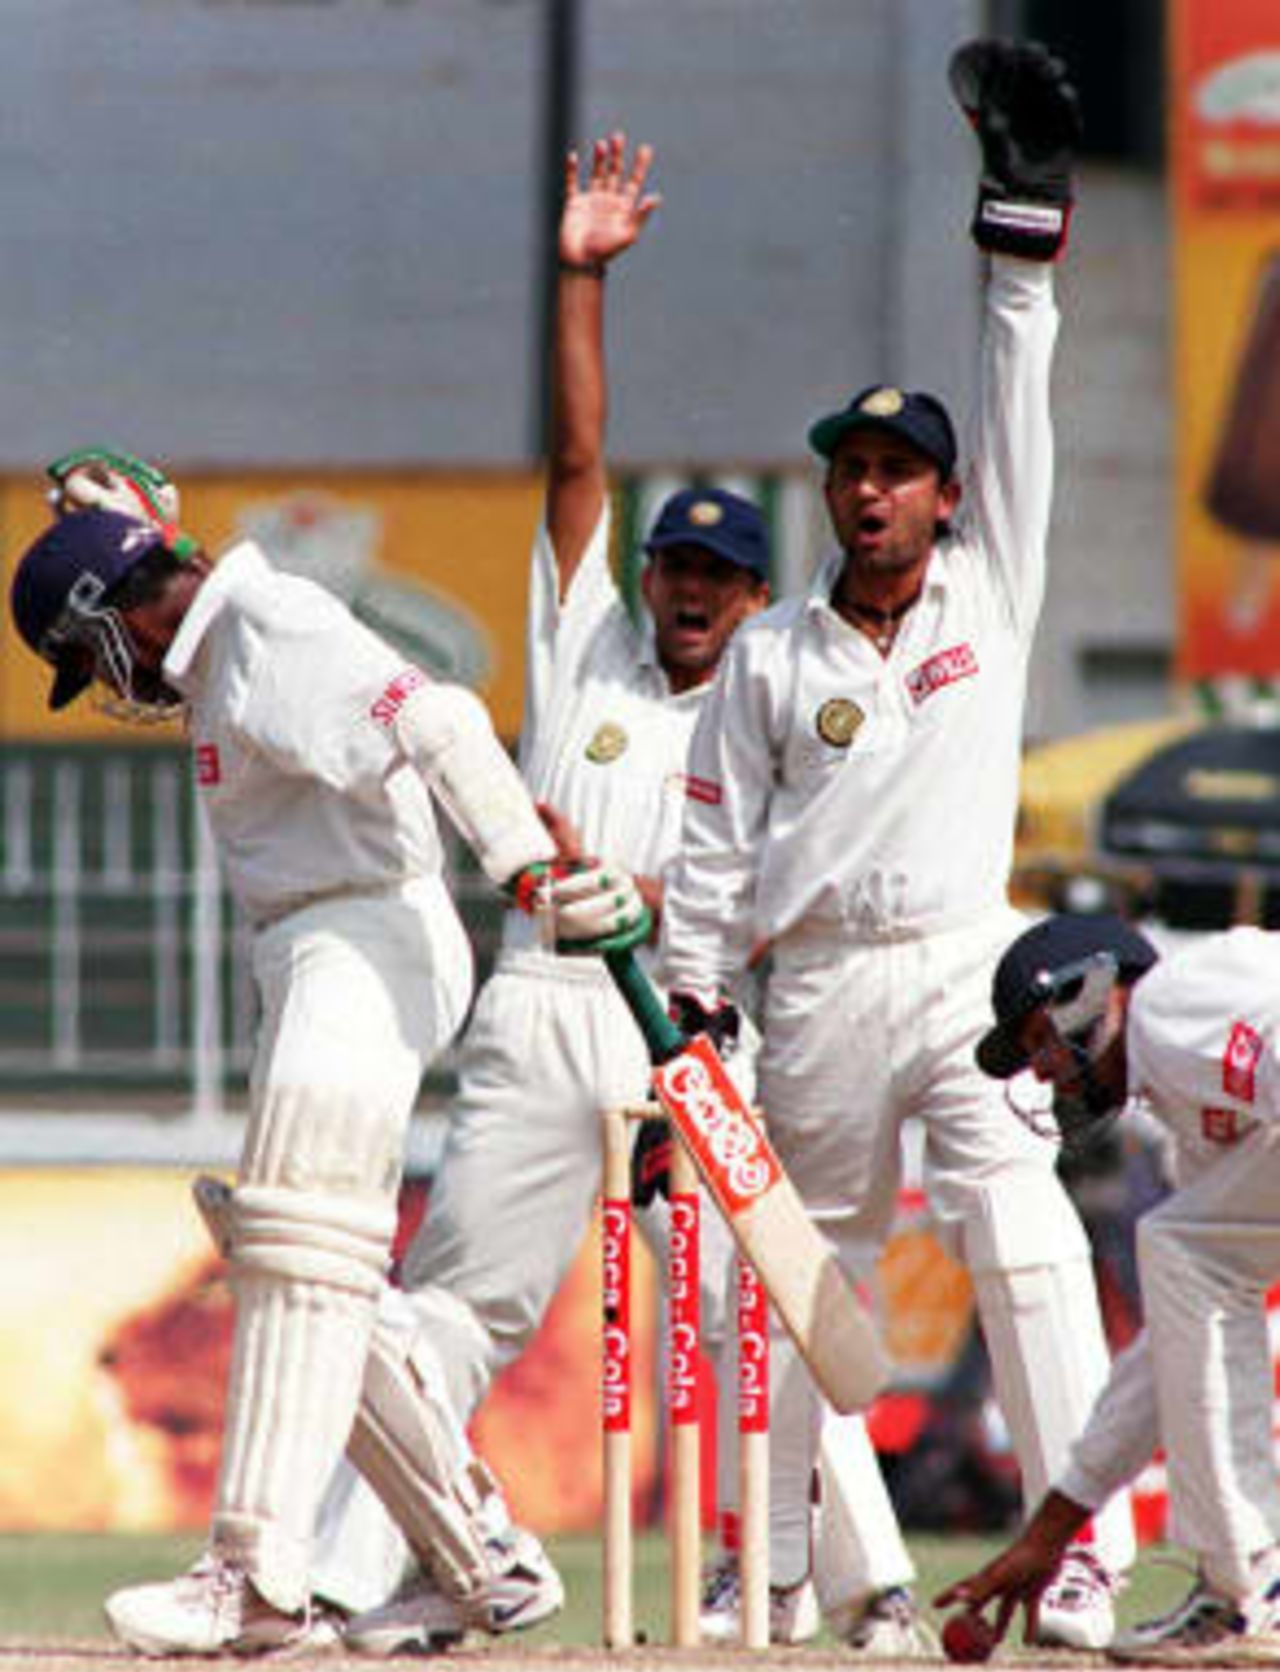 Mongia and Dravid appeal for lbw against Jayawardene - Asian Test Championship, 1998/99, 2nd Match, Sri Lanka v India, Sinhalese Sports Club, Colombo, 26 February 1999